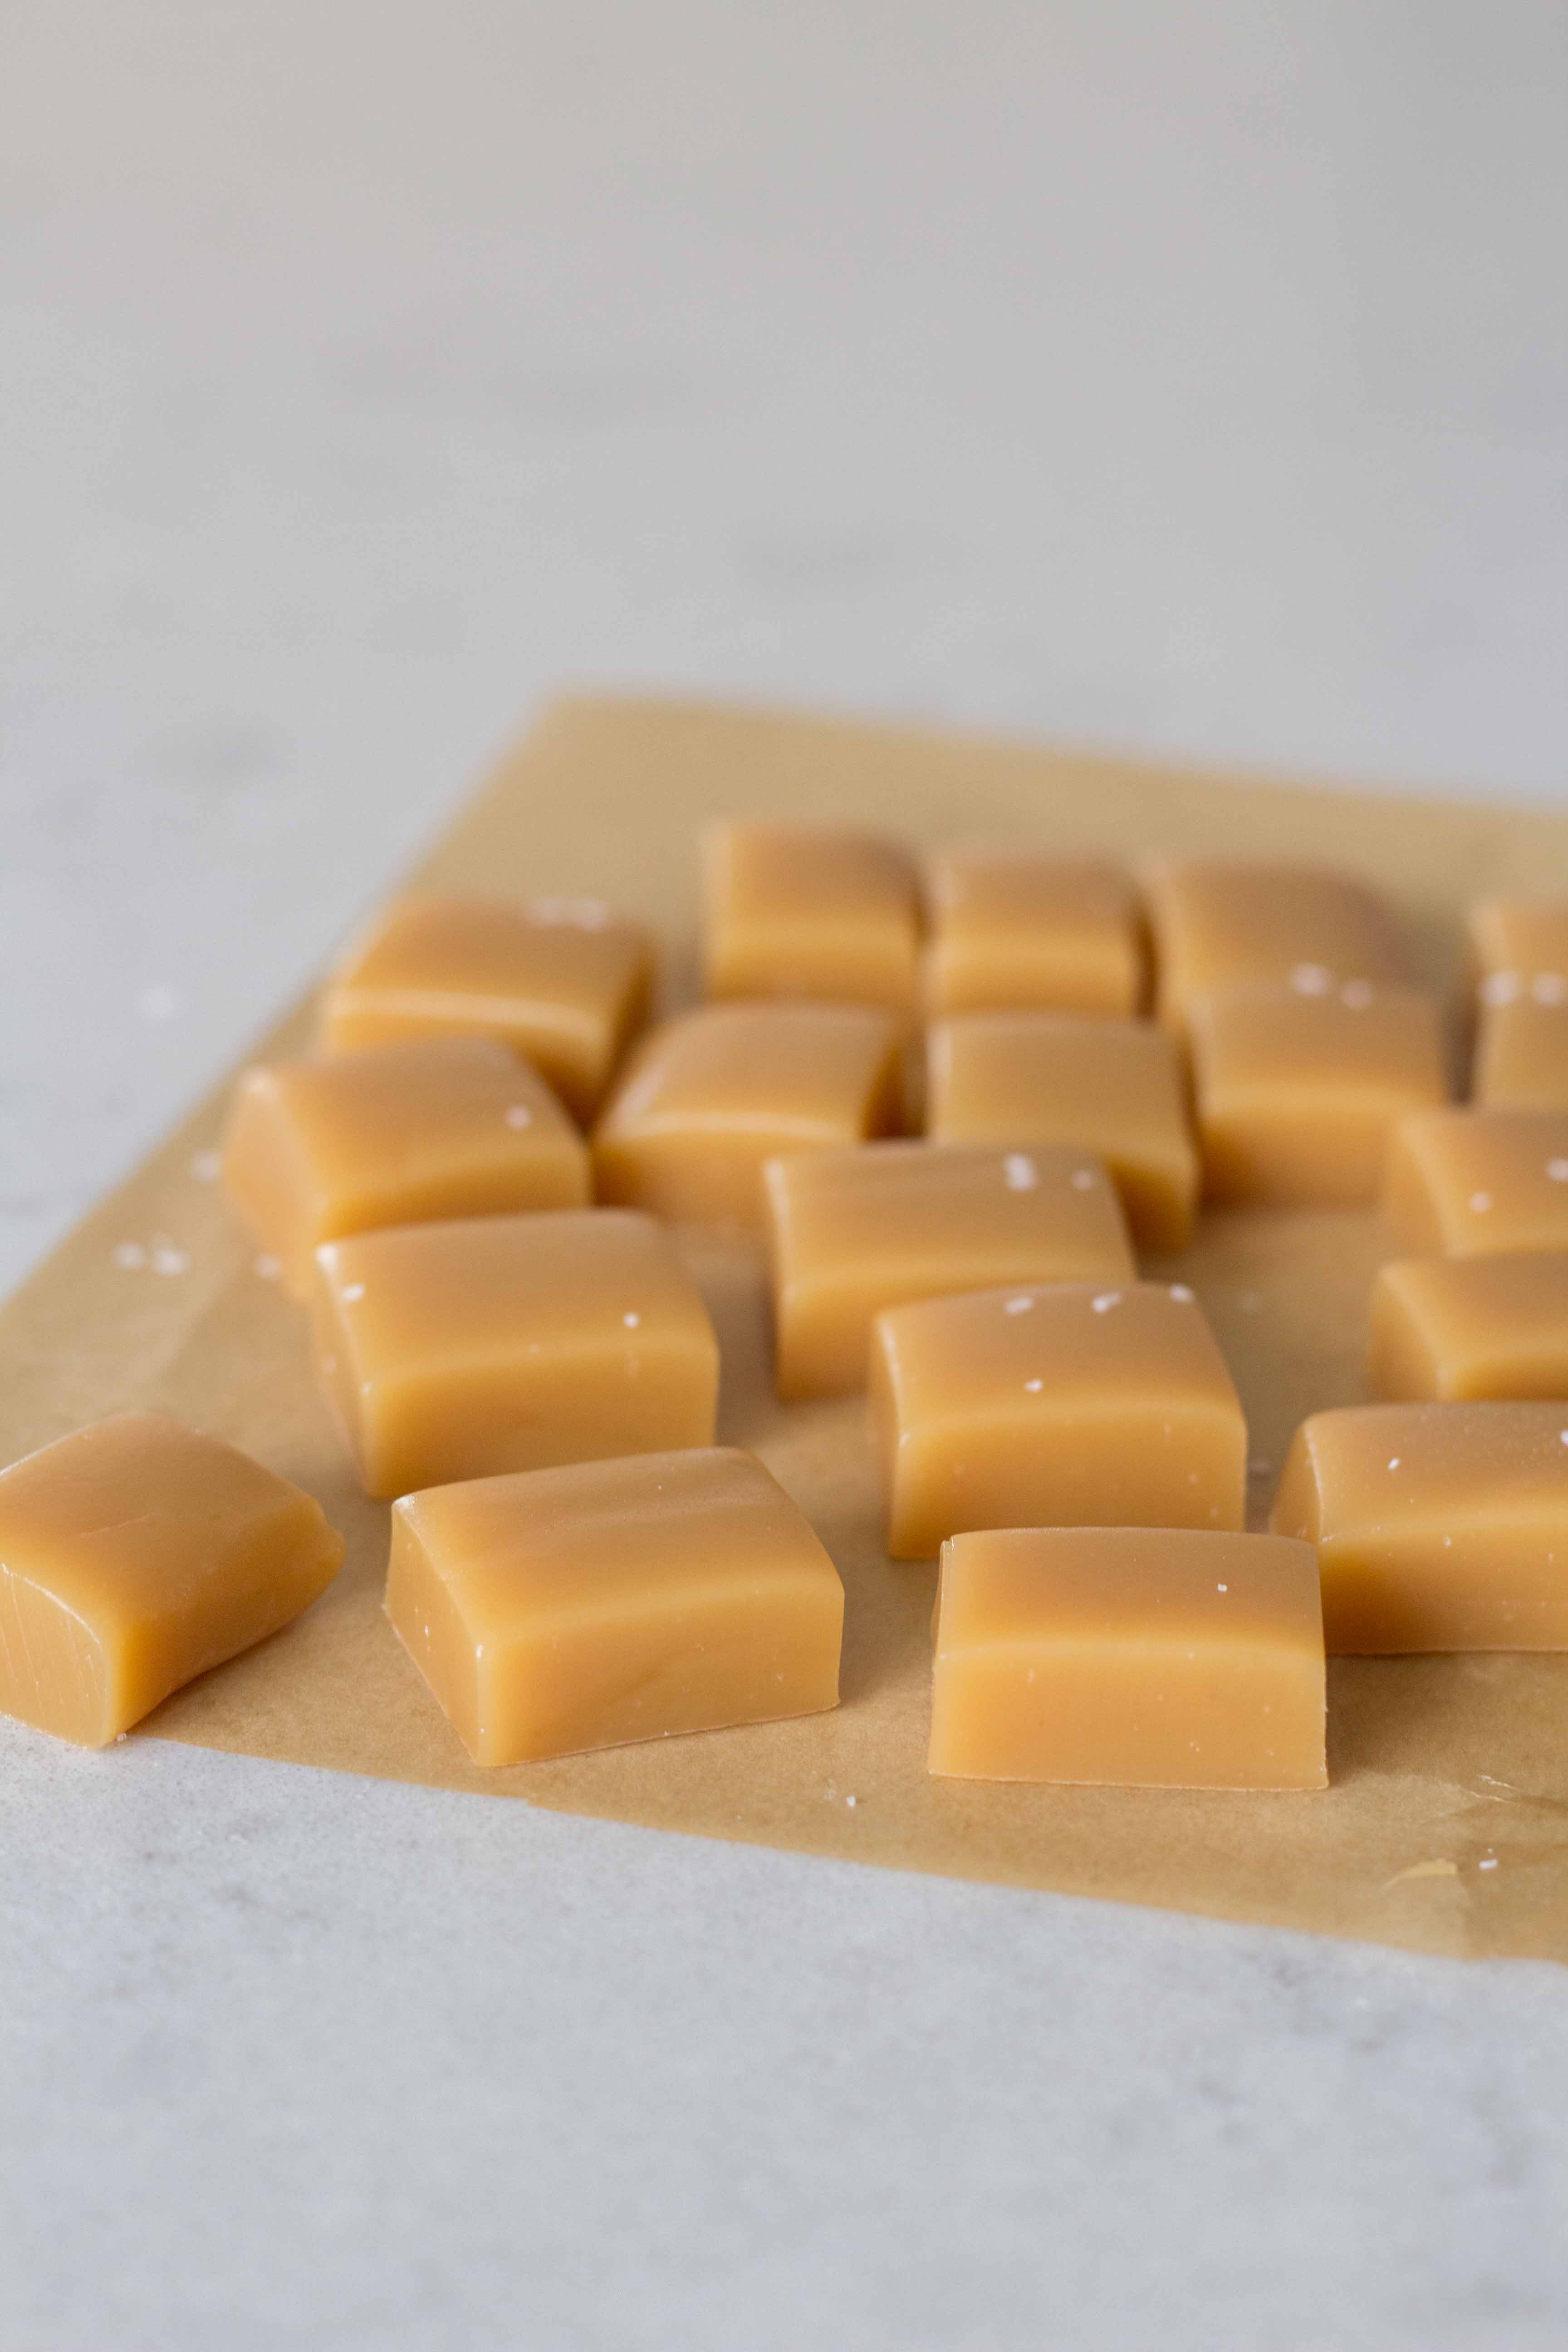 6-Minute Sea Salted Caramels
6-Minute Microwave Caramels